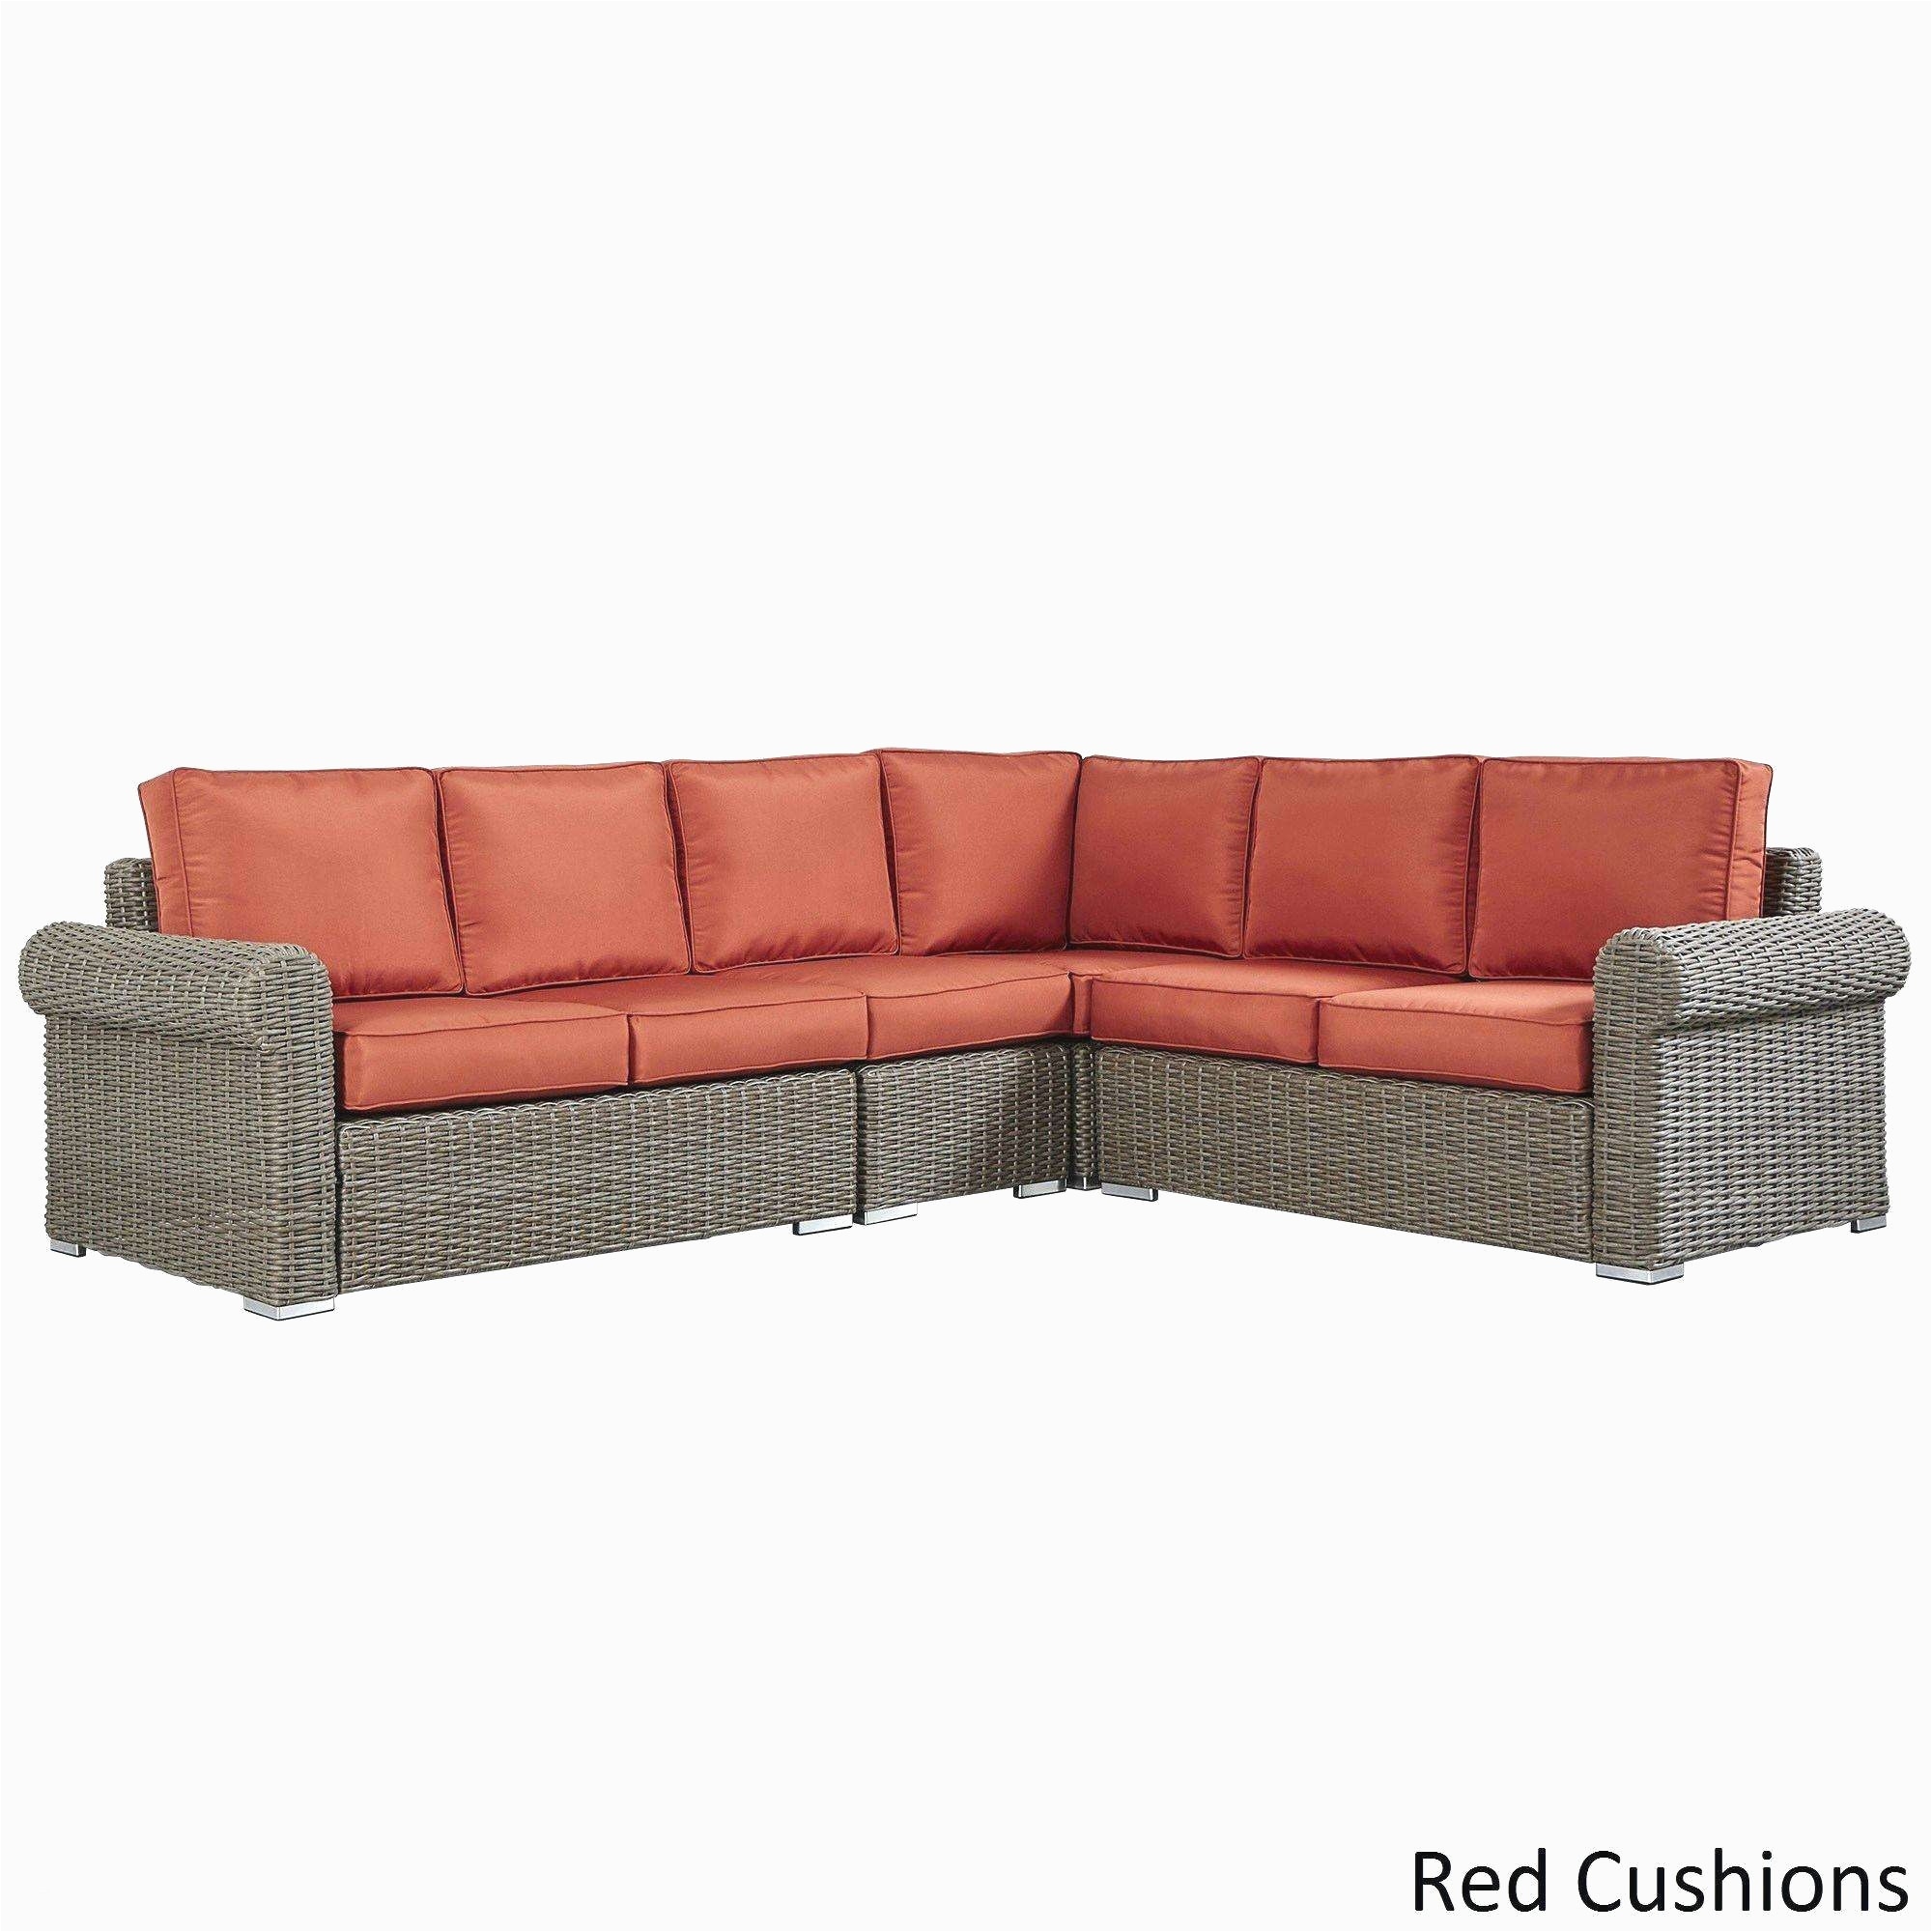 outdoor patio ideas great patio furniture ideas amazing wicker outdoor sofa 0d patio chairs